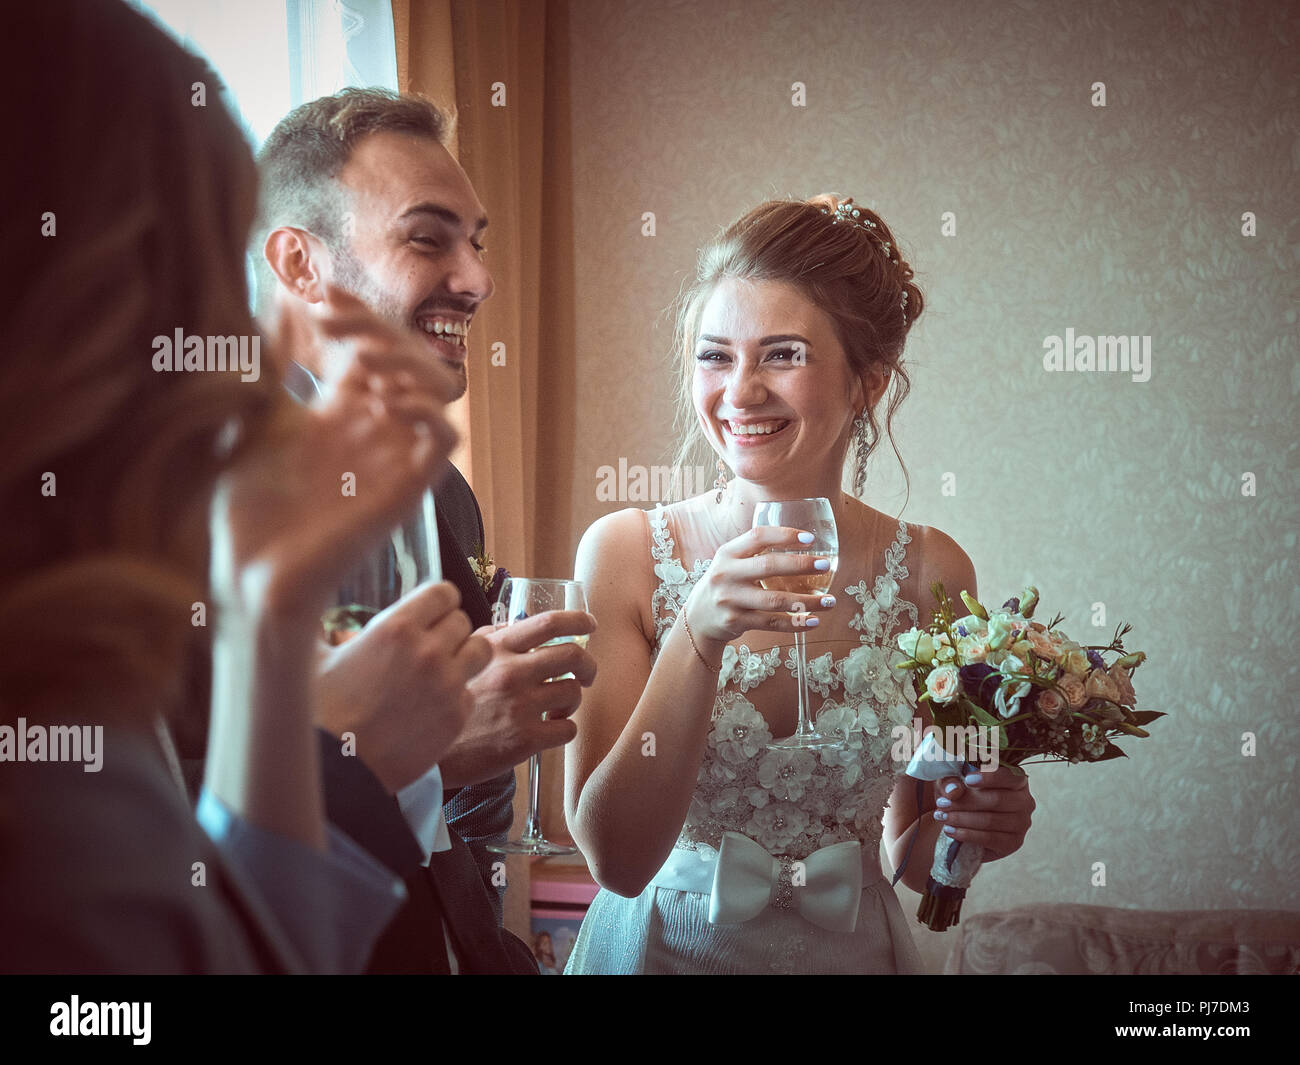 Solemn ceremony of marriage of the newlyweds. Customs and traditions inherited from a past life in the old Soviet Union. People have fun, drinking. Stock Photo